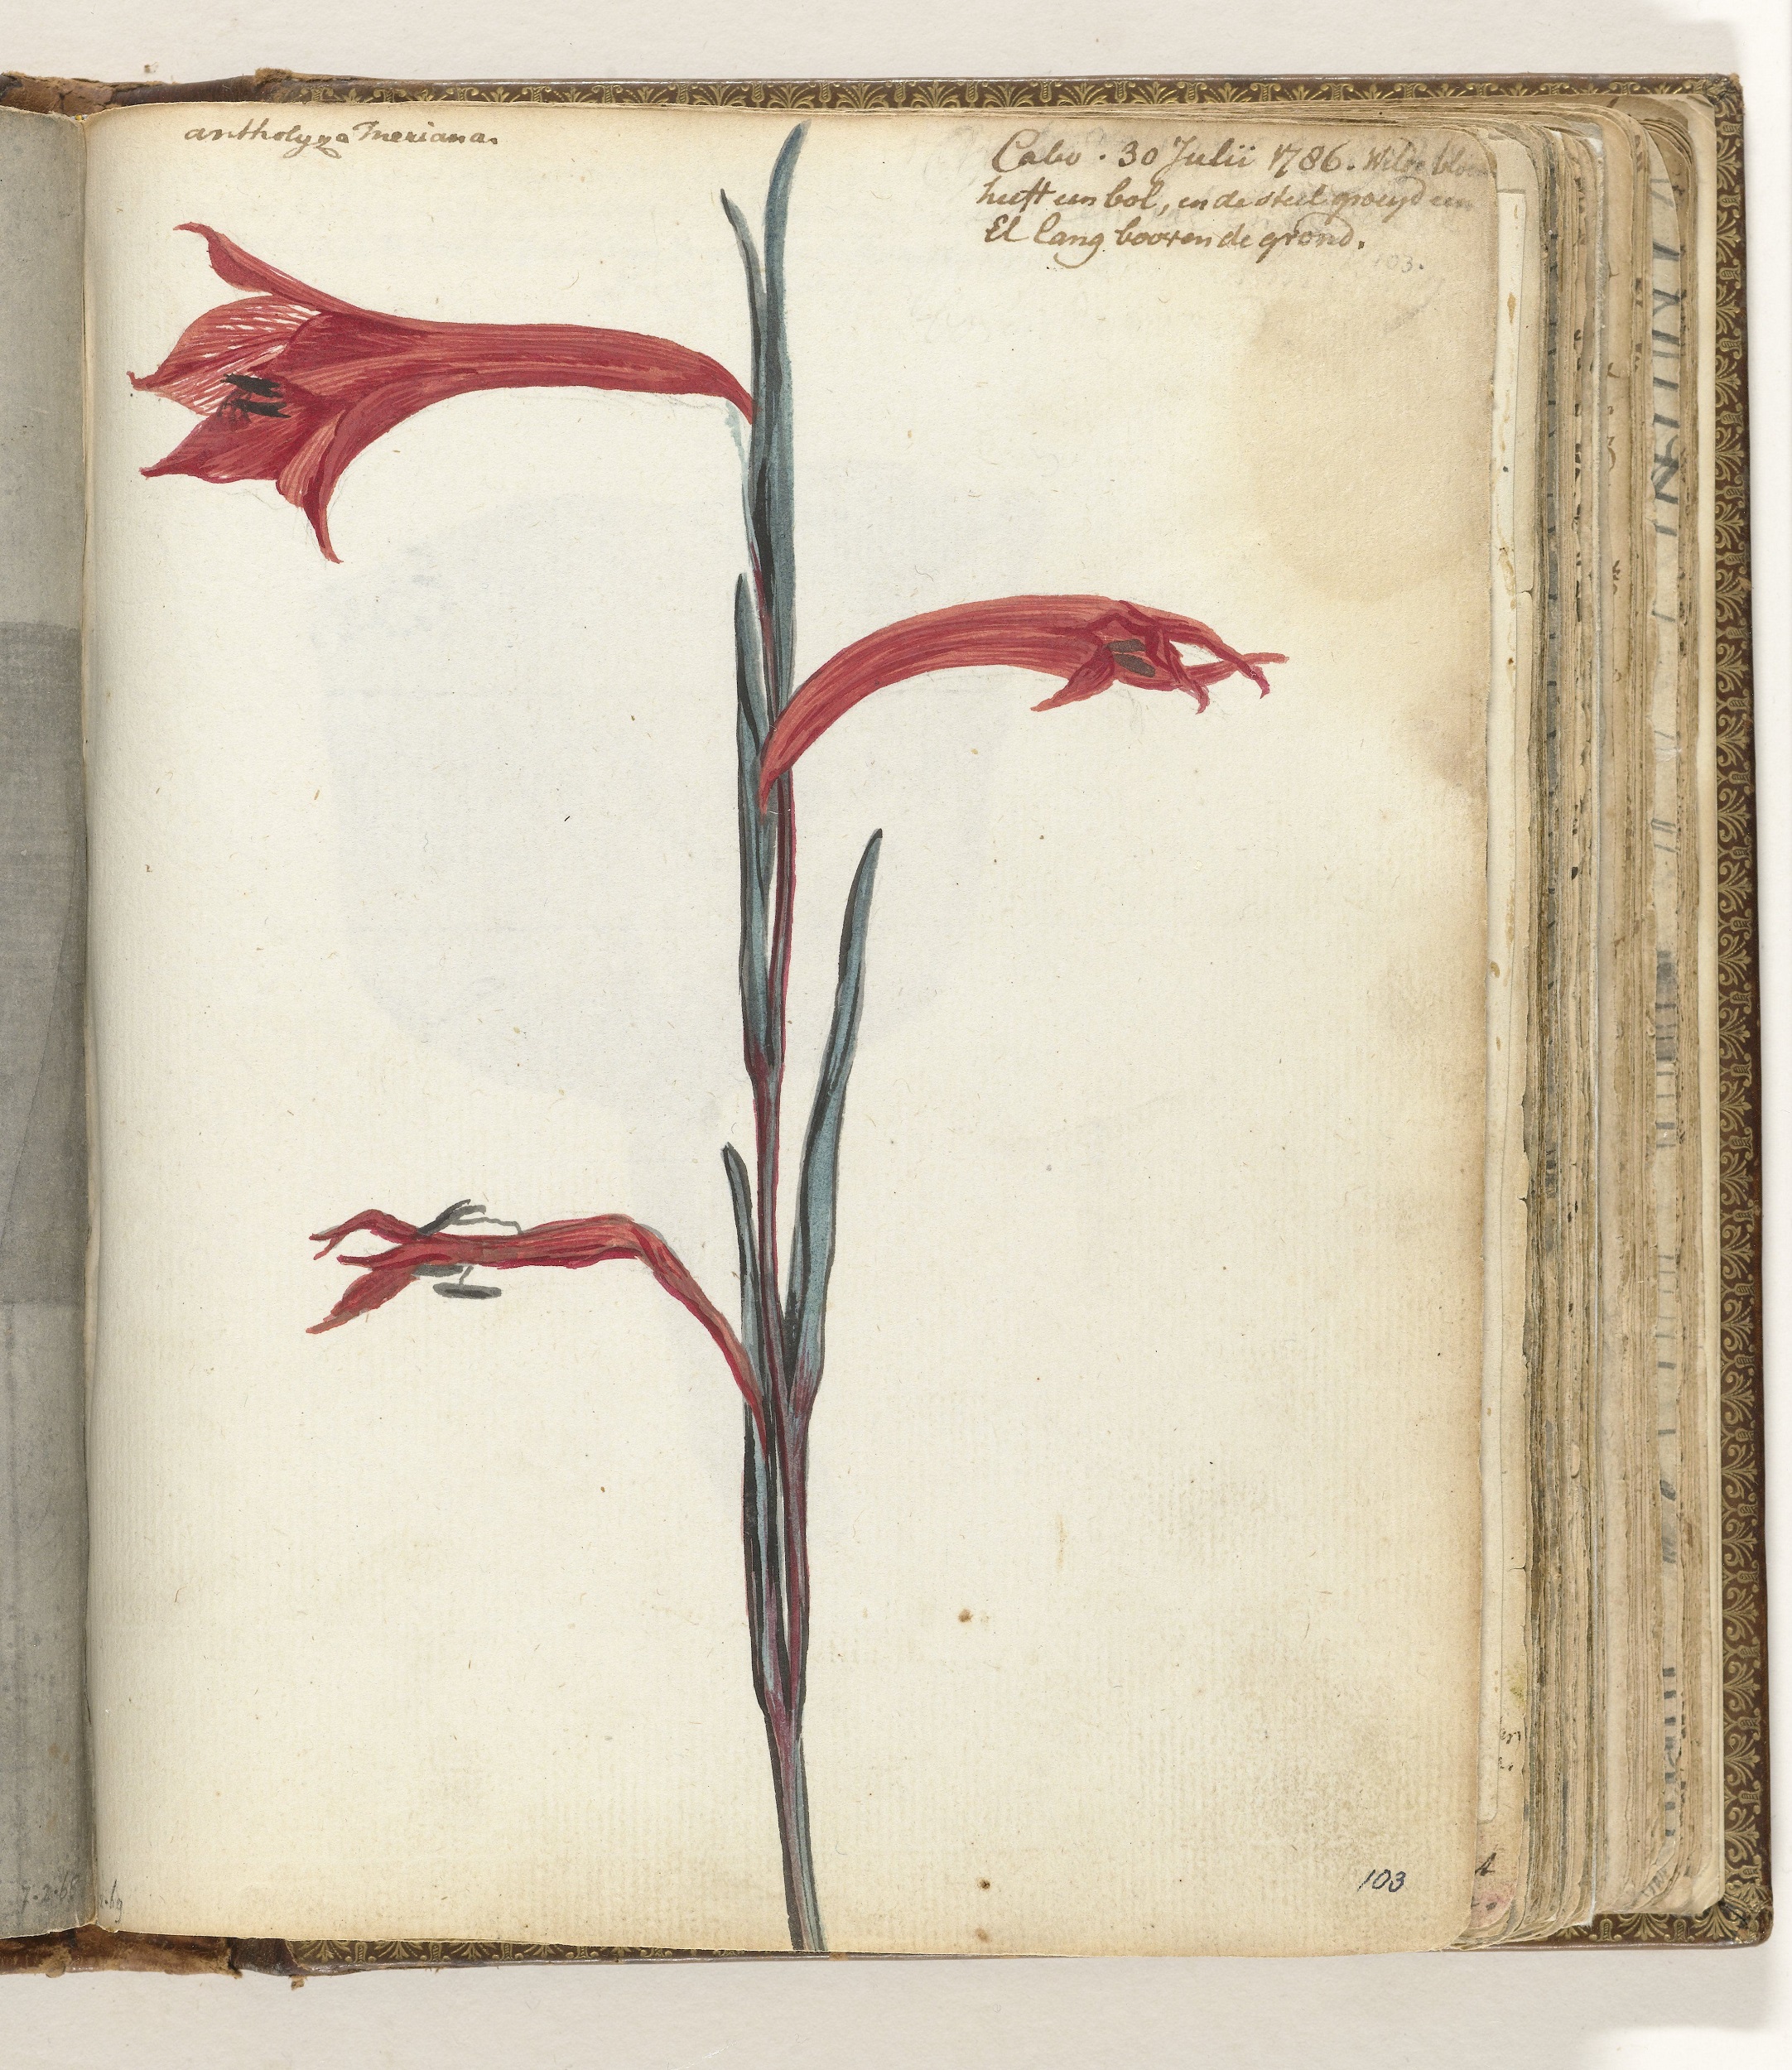 Page from a scrapbook featuring a painting of red flowers on a stalk